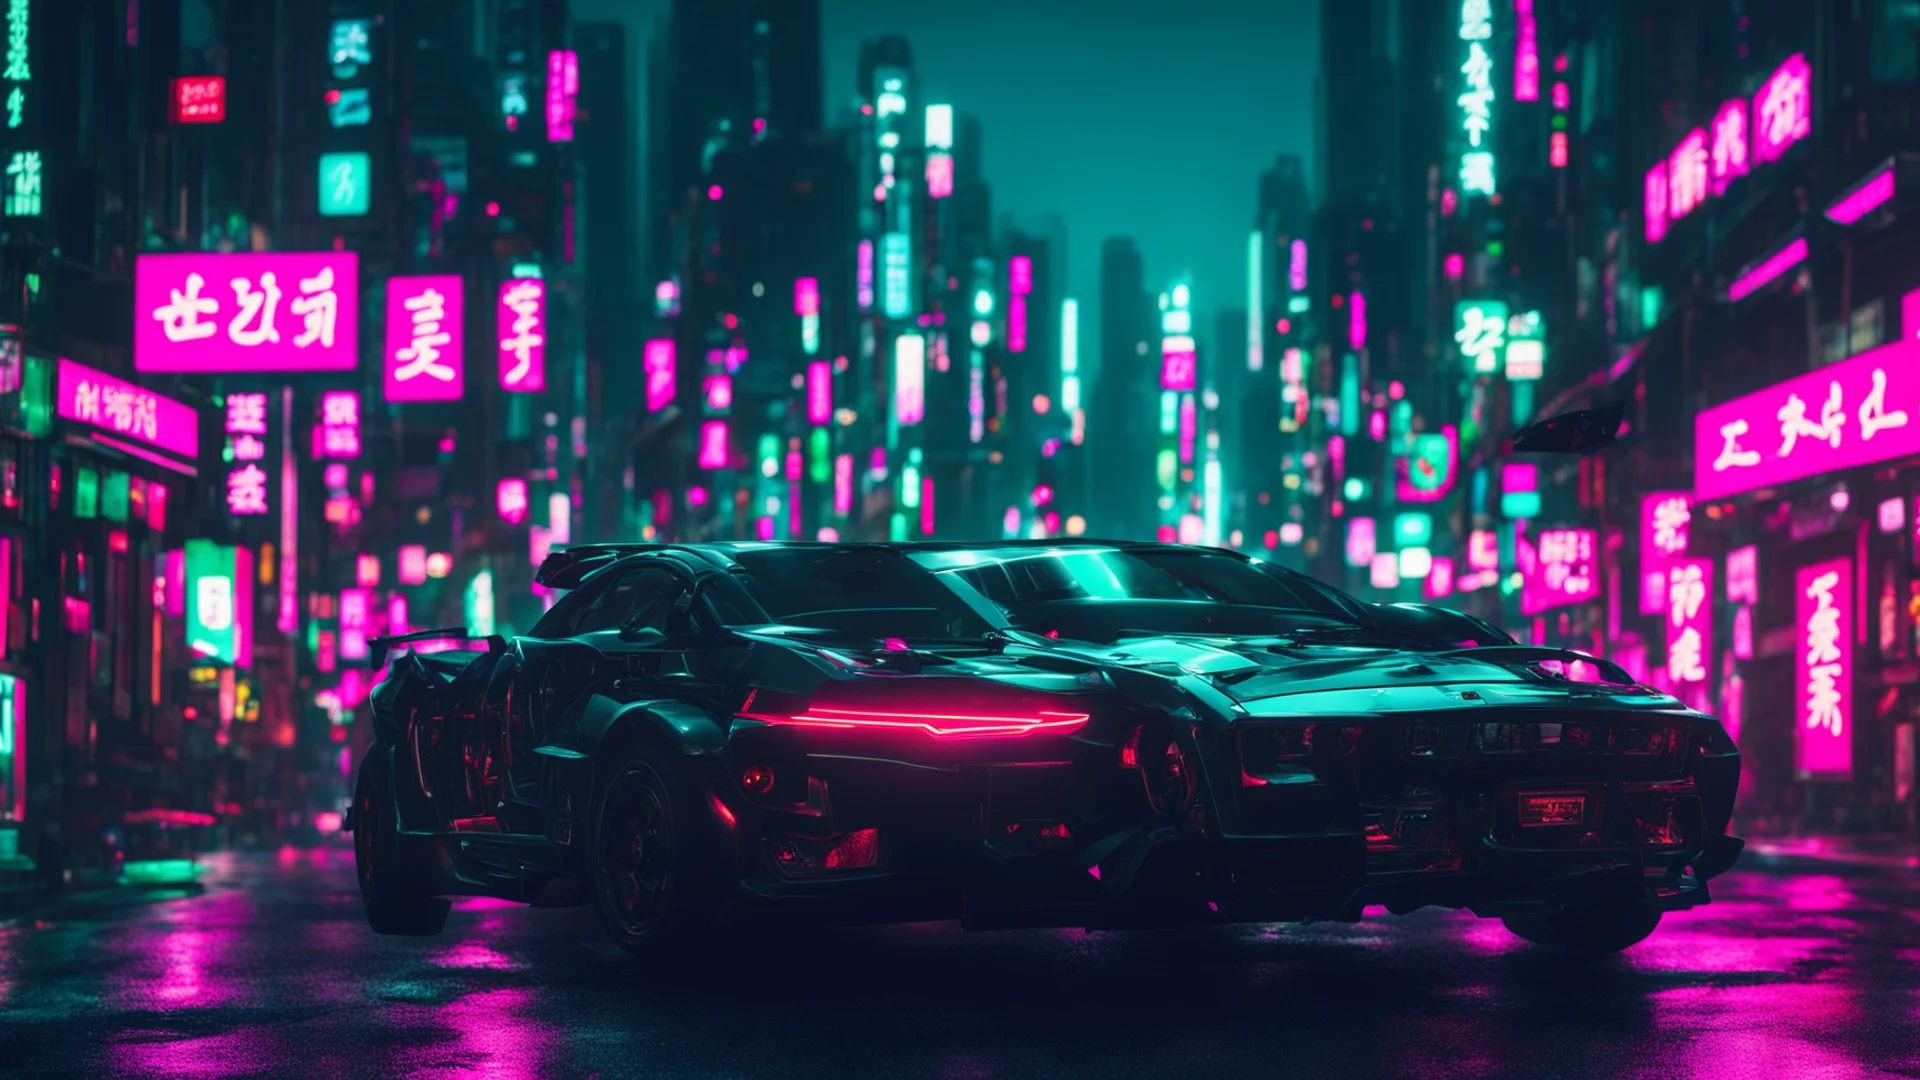 cyberpunk car in the nights of japan 1920x1080 resolution amazing awesome portrait 2 wide